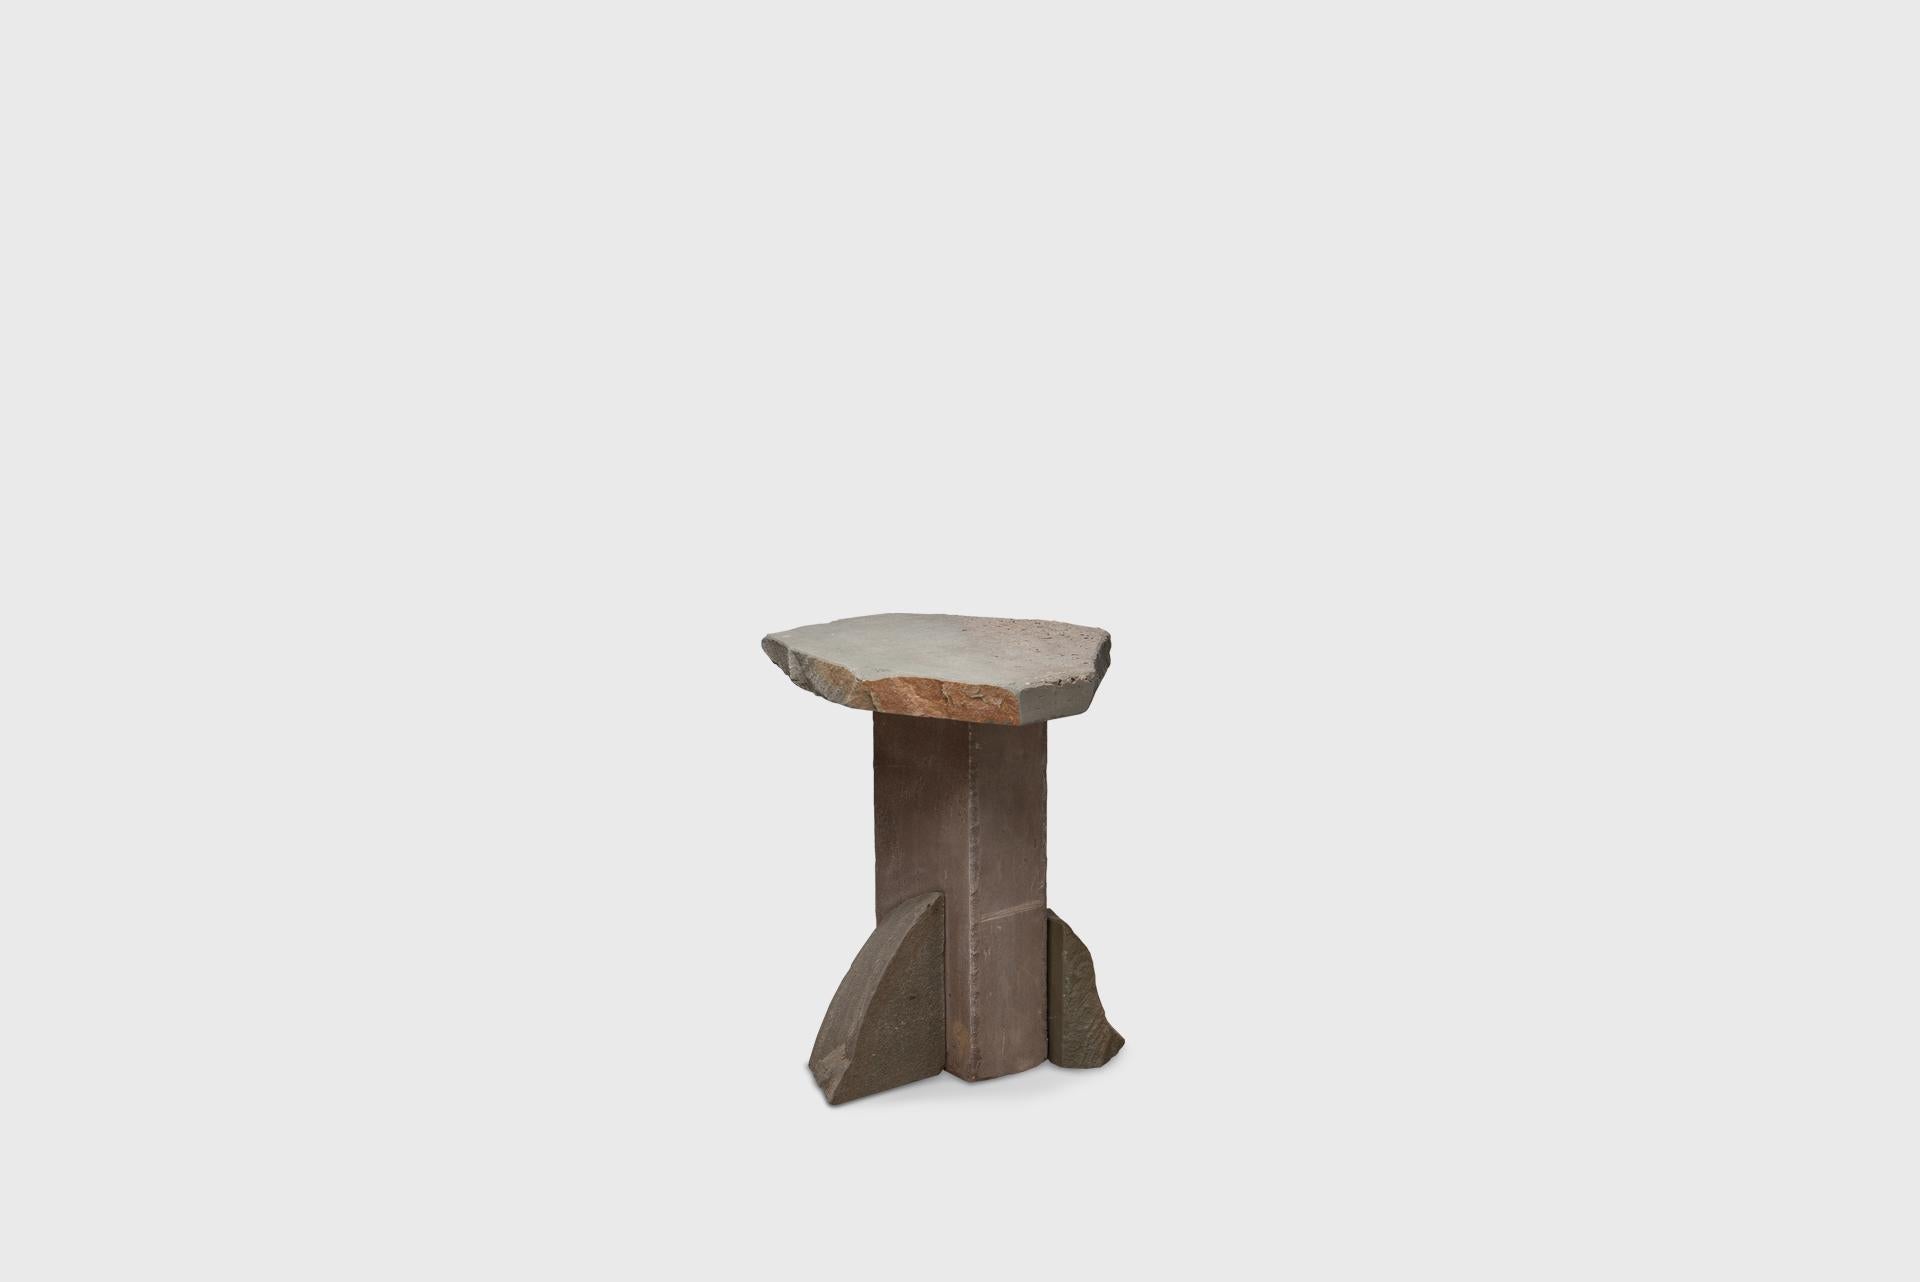 Contemporary Offcut Side Table #1 Series “Greywacke”